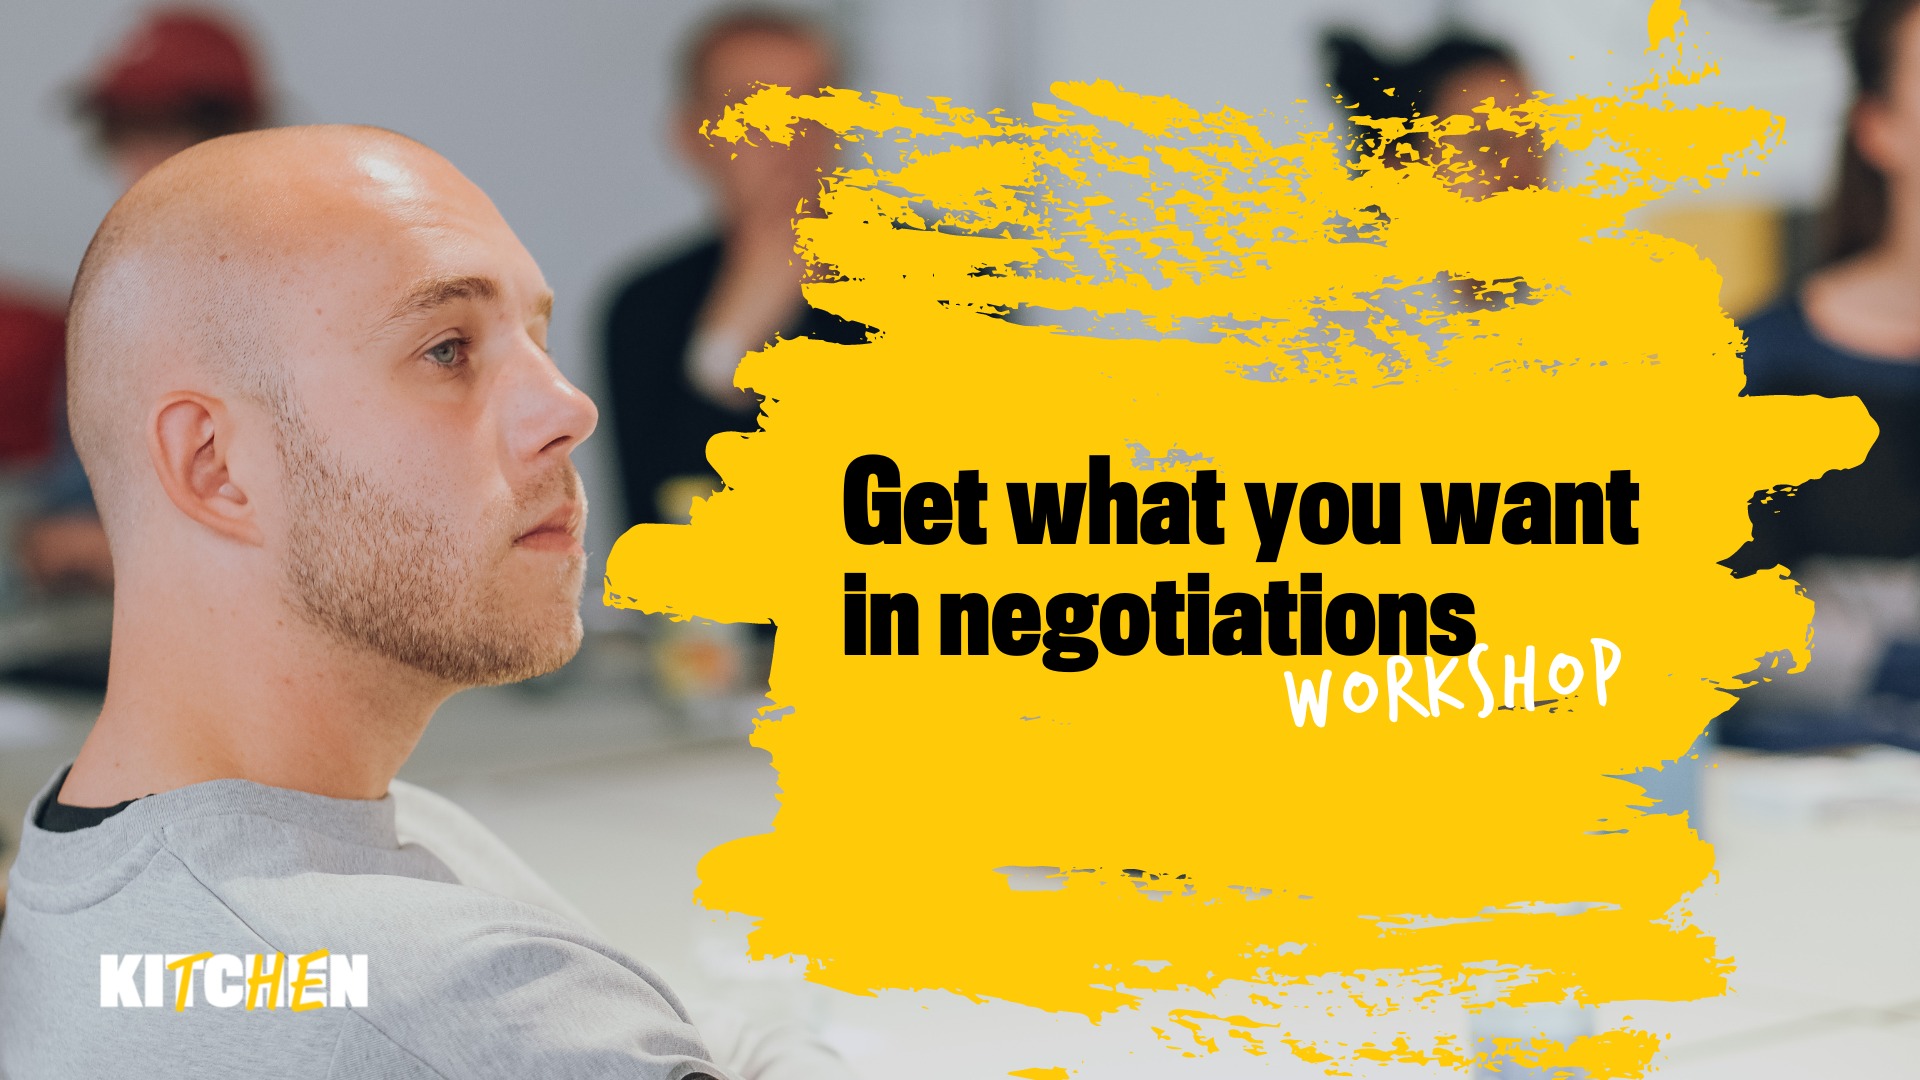 Get what you want in negotiations